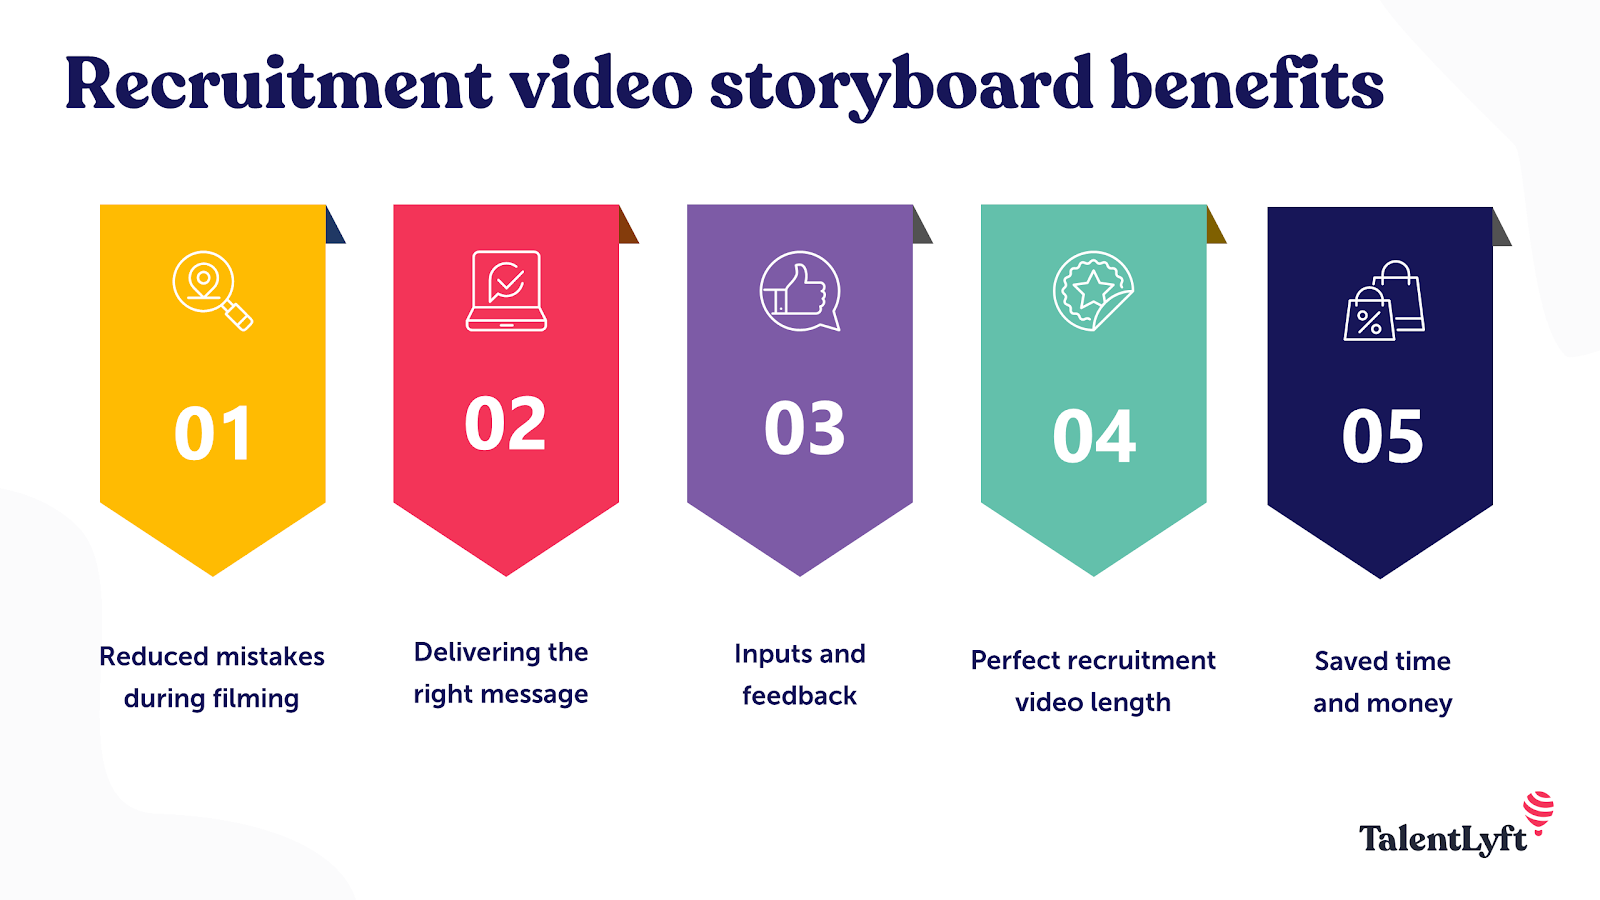 Why do you need to create a recruitment video storyboard